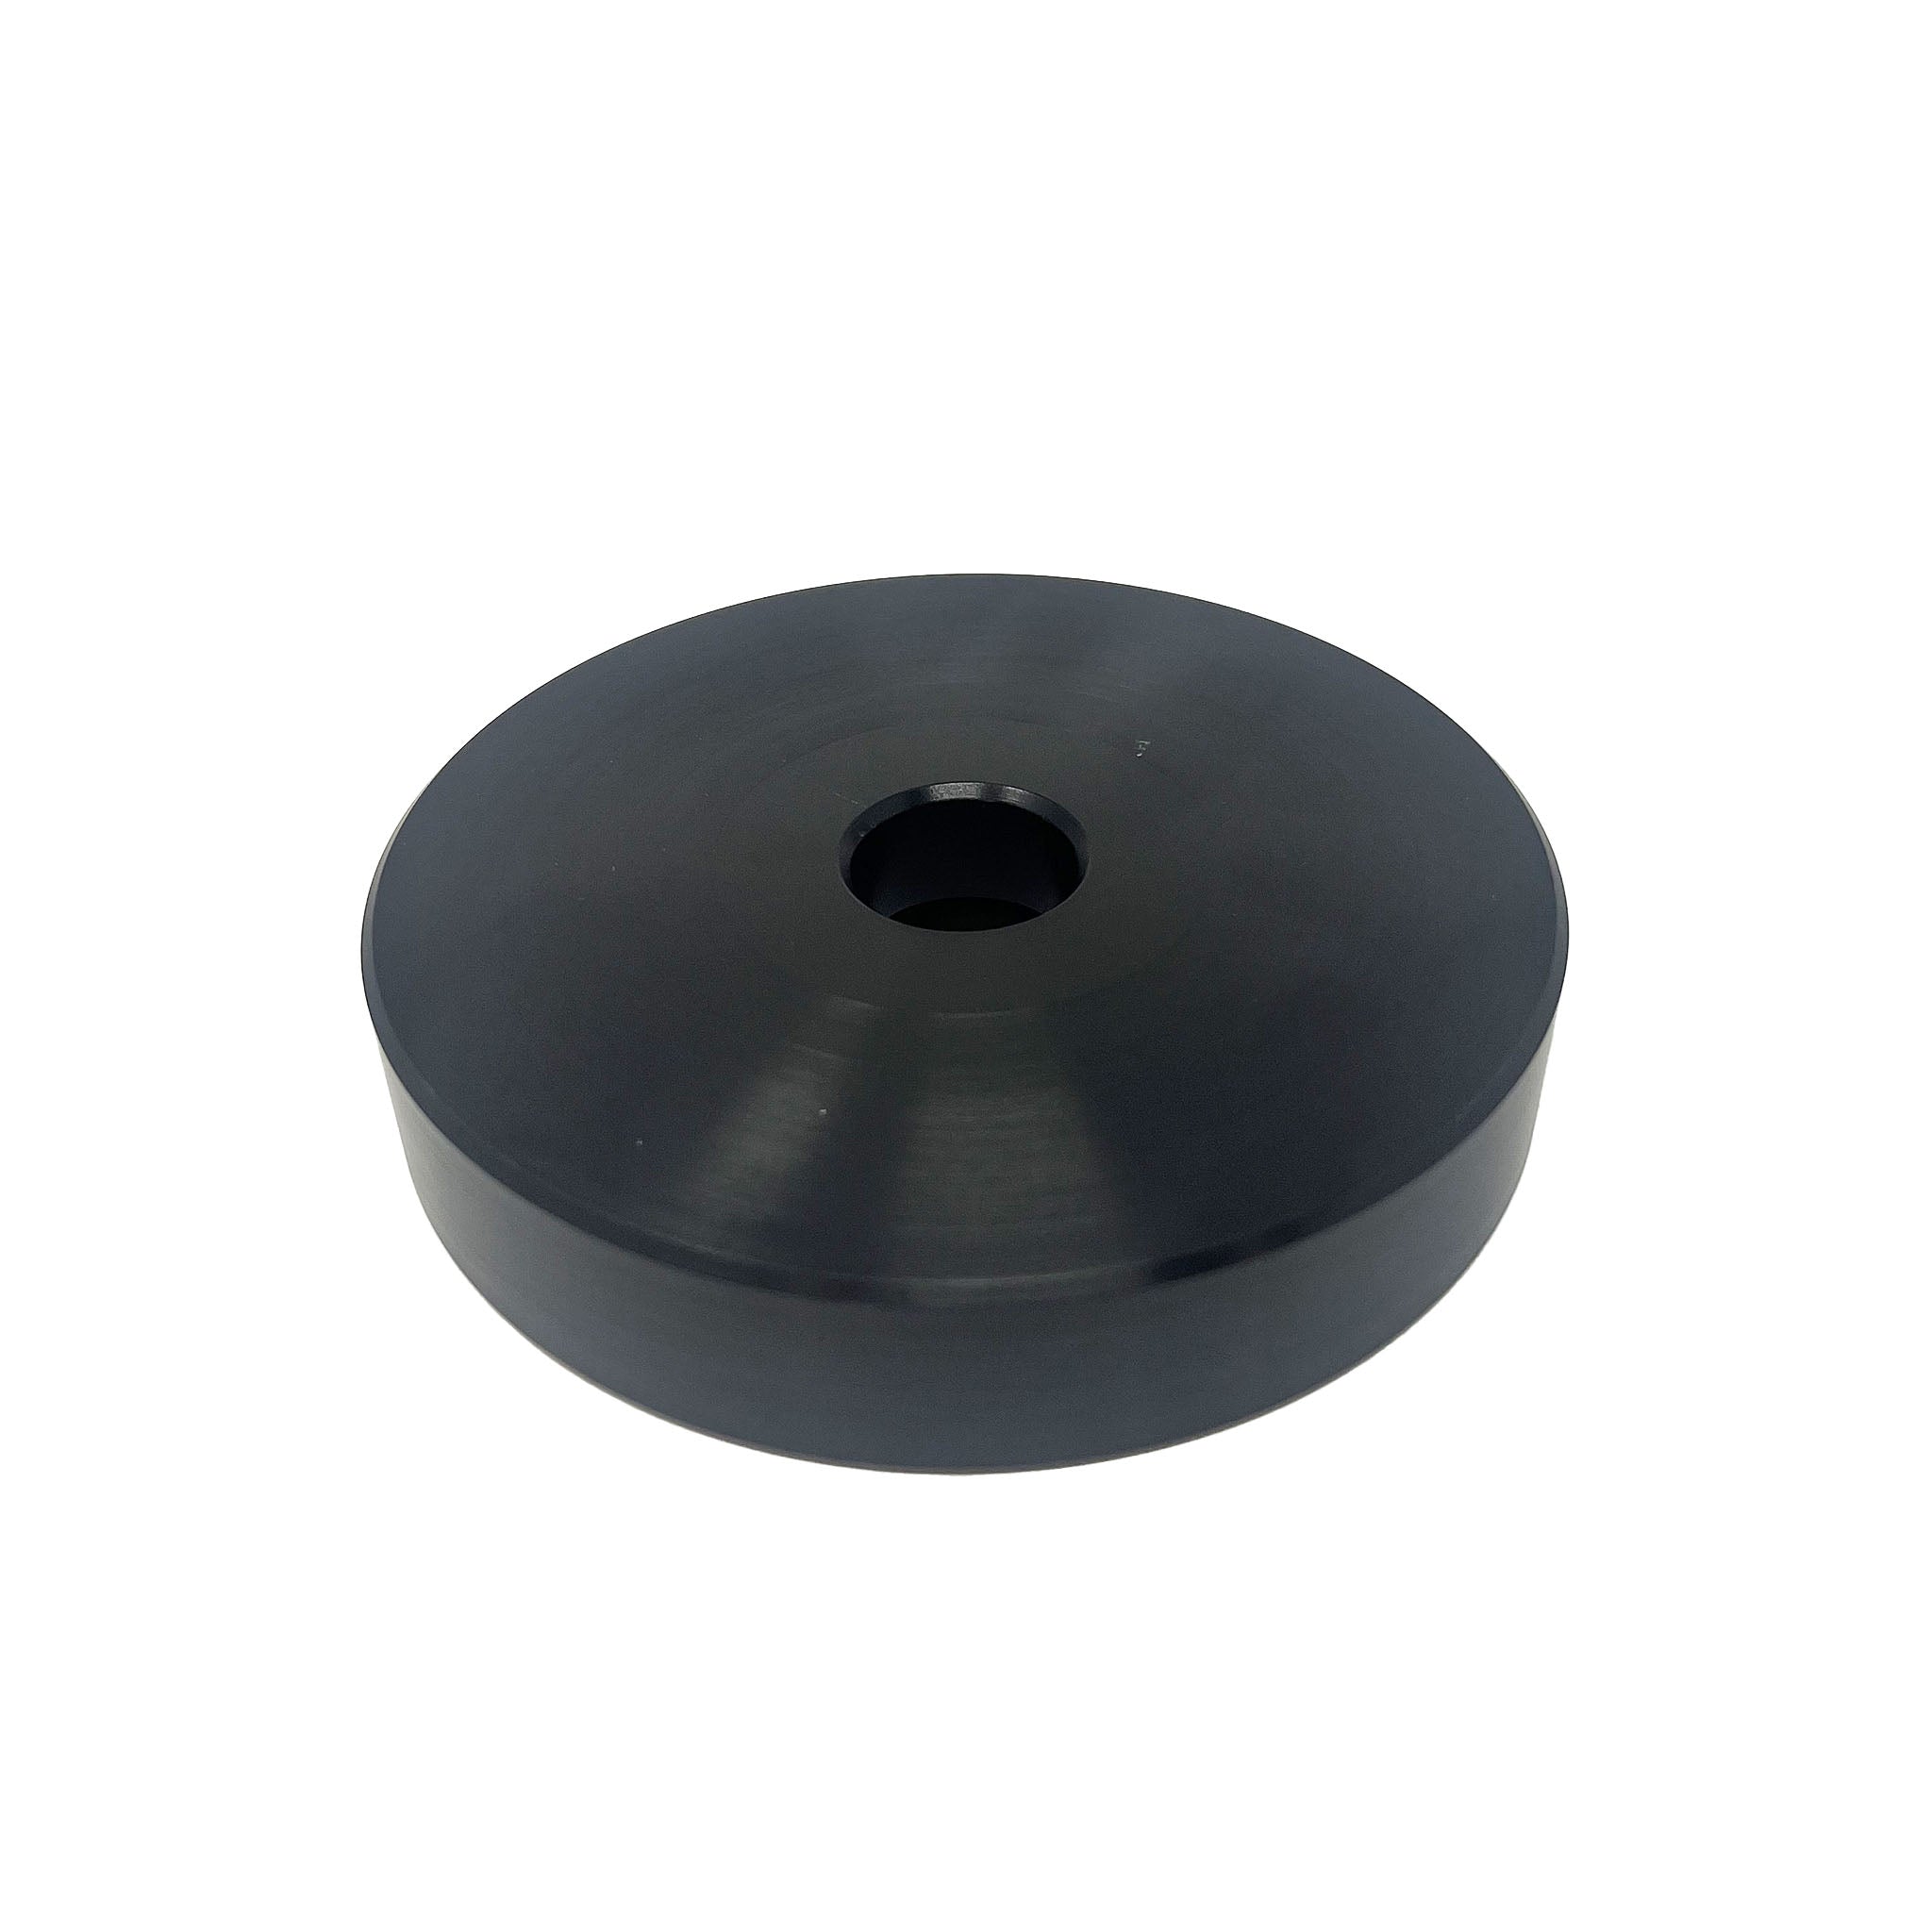 Small Backing Plate 4 3/4" diameter